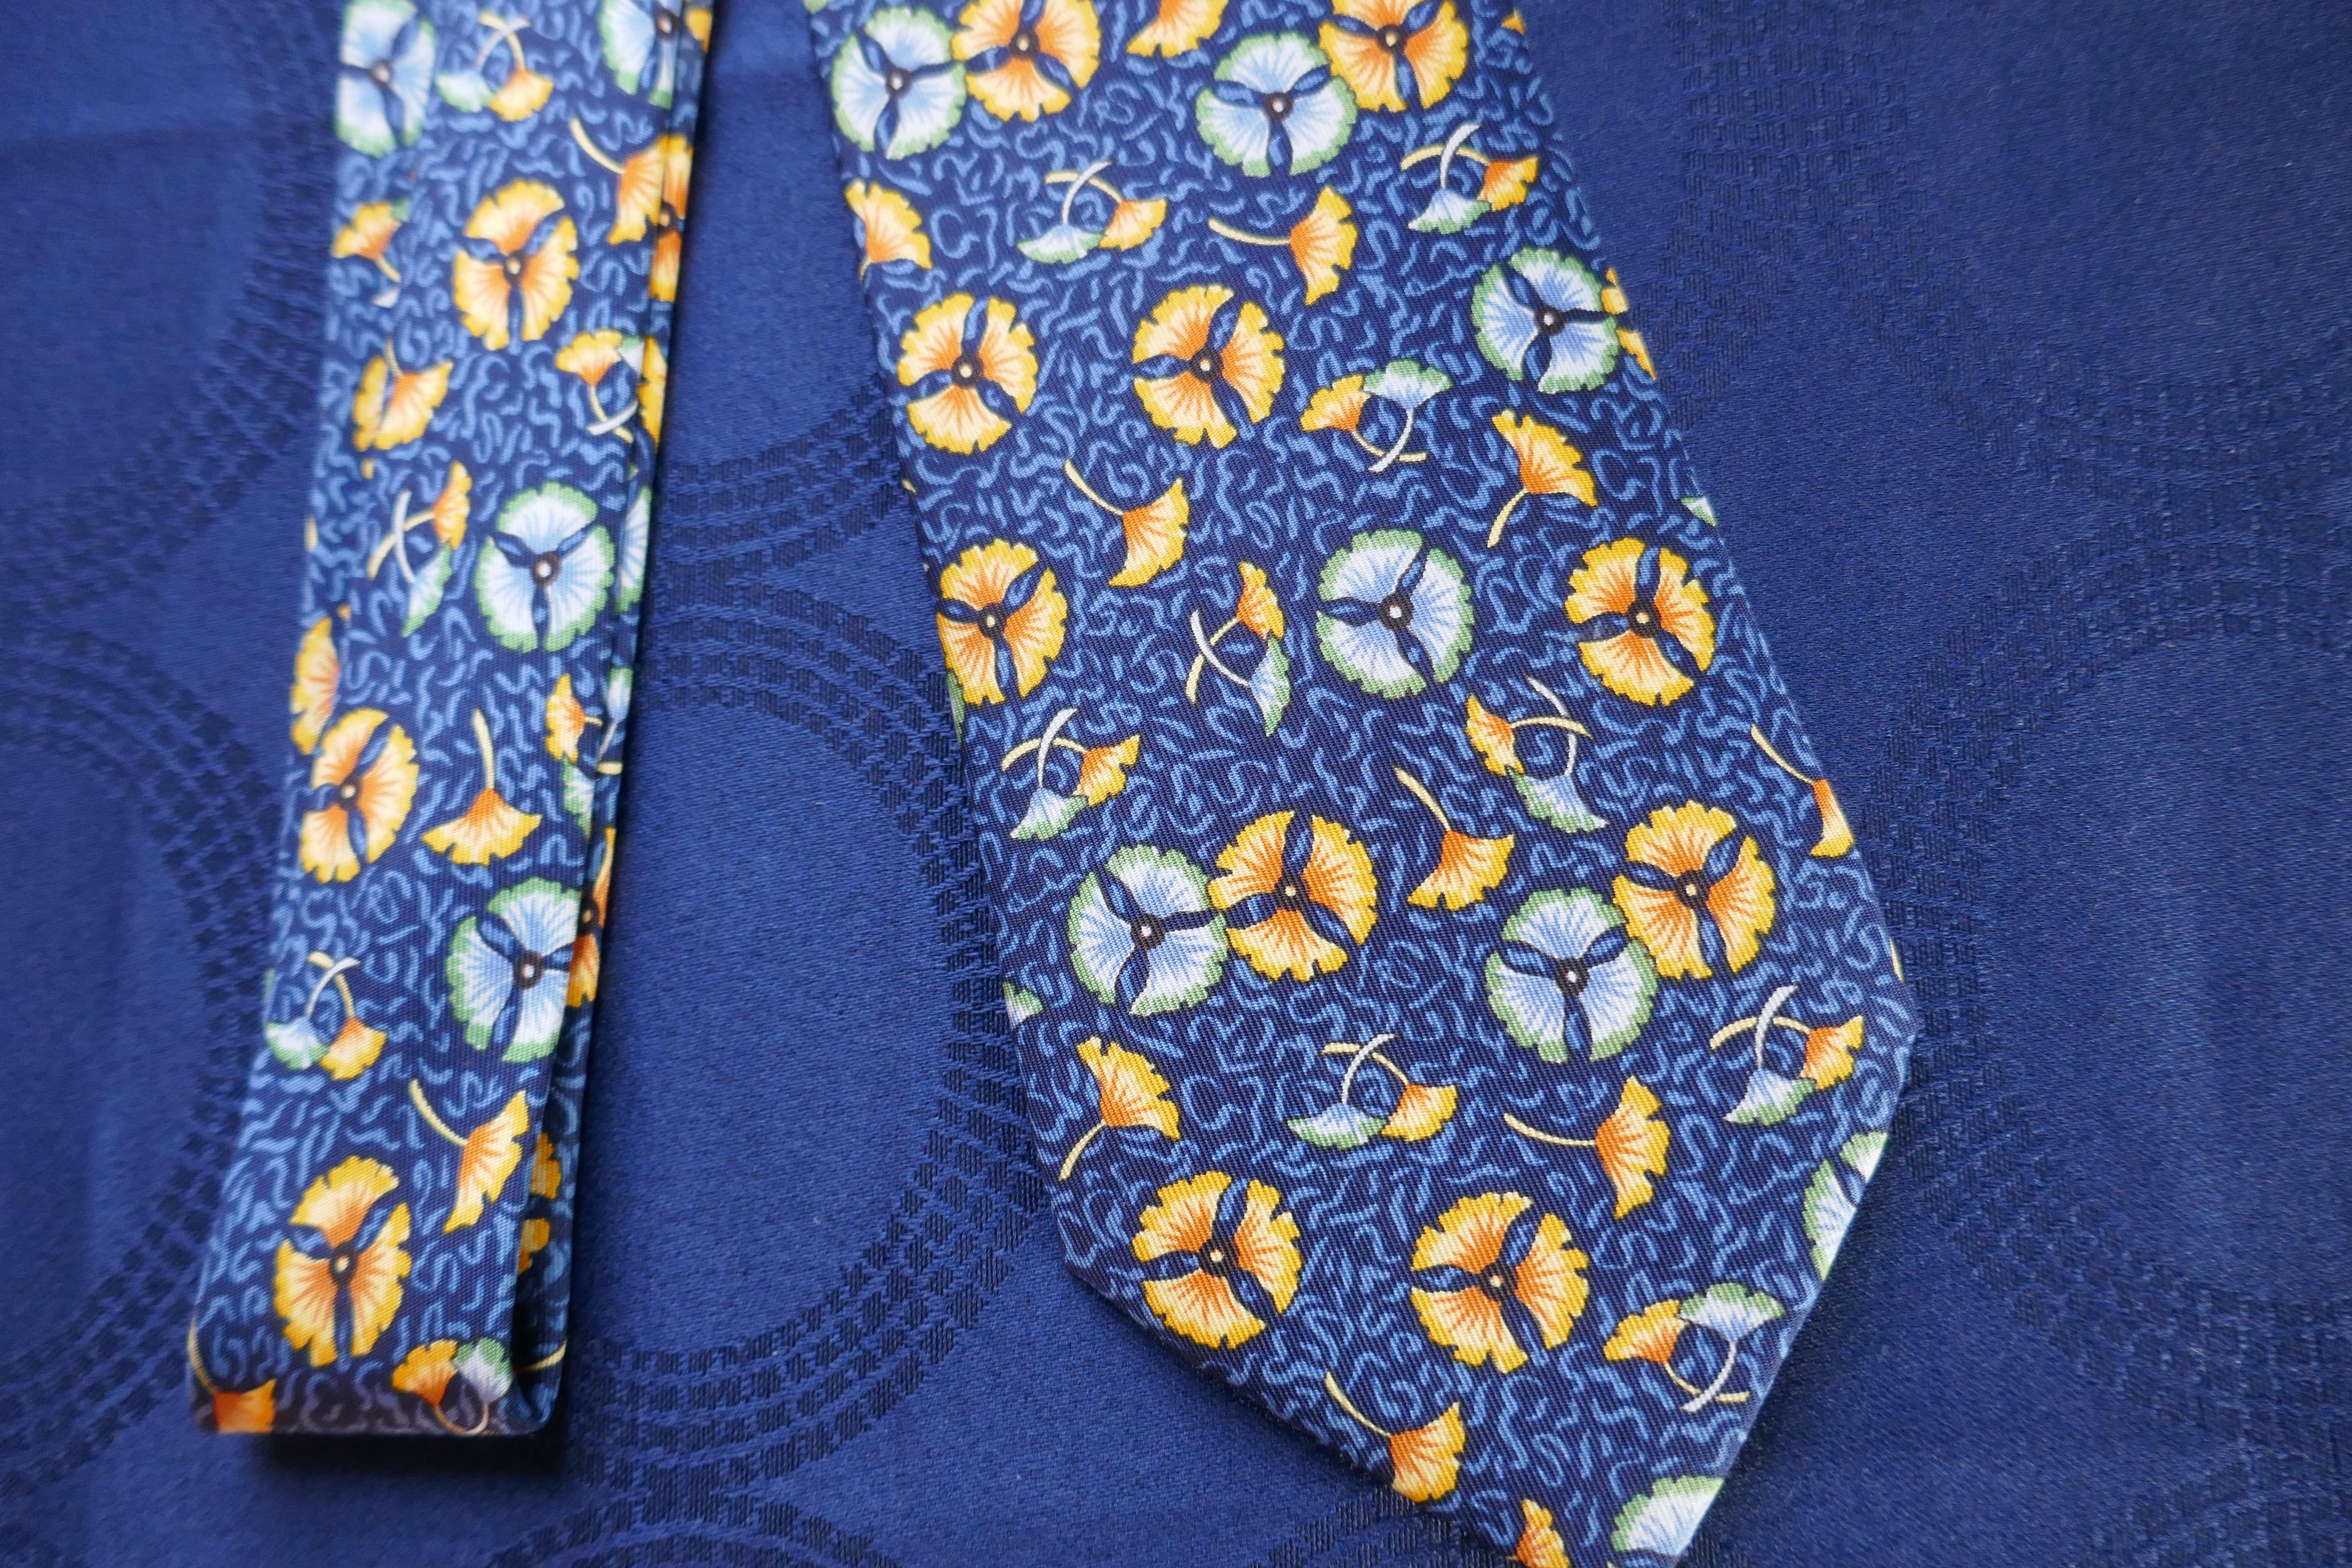 Rare Hermes Silk Tie, All Over Lotus Flower Pattern, Hermes Orange and Blues

Classic Hermes All Over floralDesign
Superb Colour-way Orange and Blue
A Very Special tie, instantly recognisable as Hermes by those in the know
100% silk 
Silk Lined in